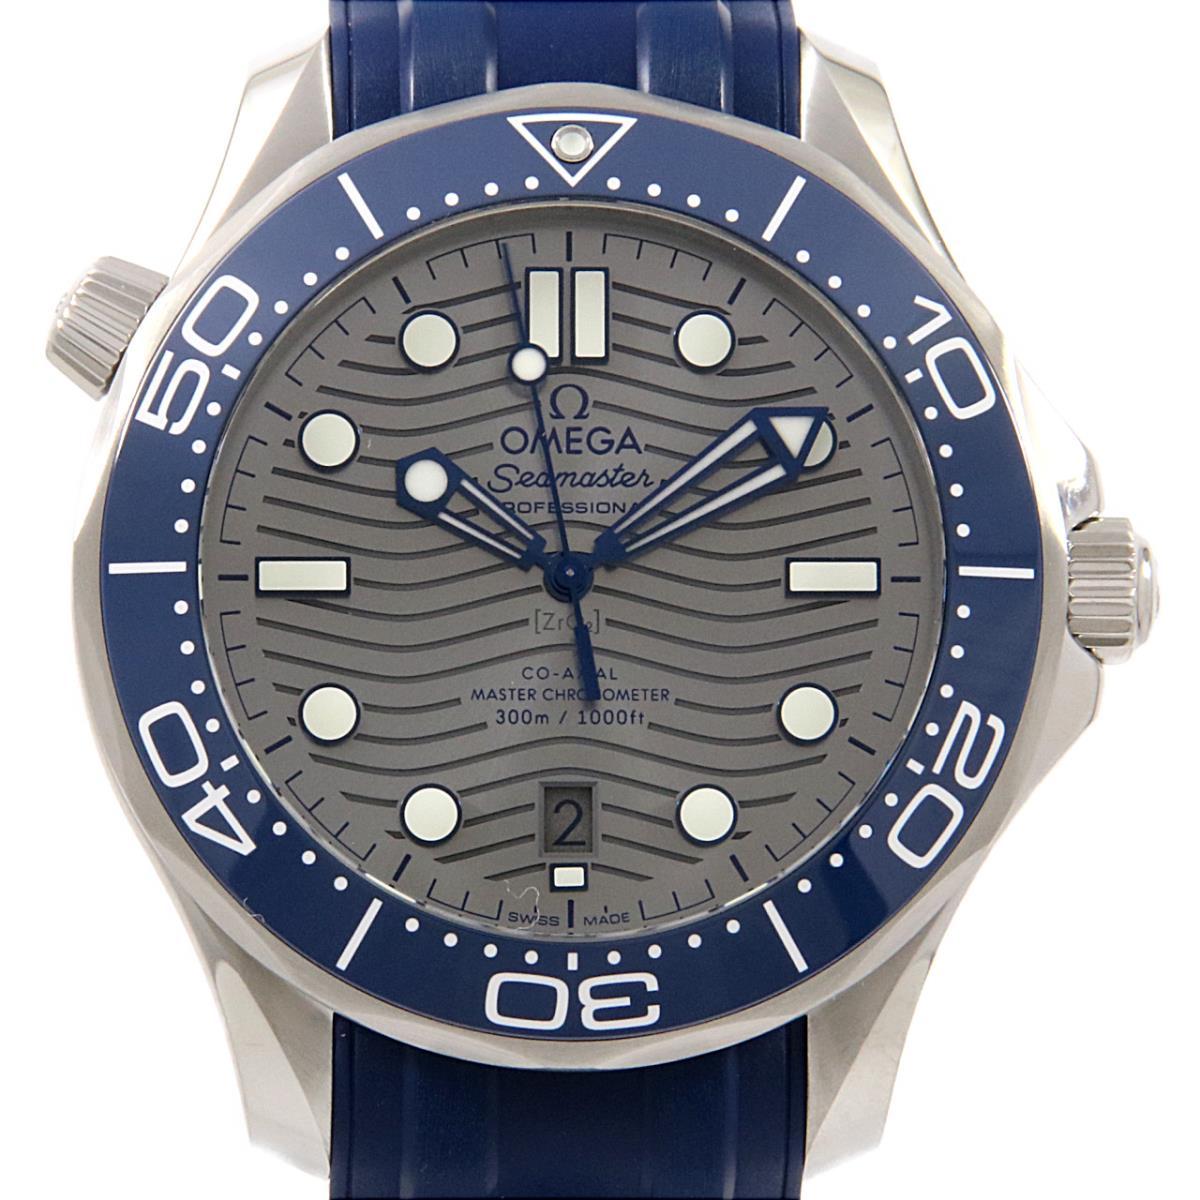 [BRAND NEW] Omega 210.32.42.20.06.001 Seamaster Diver 300M Automatic